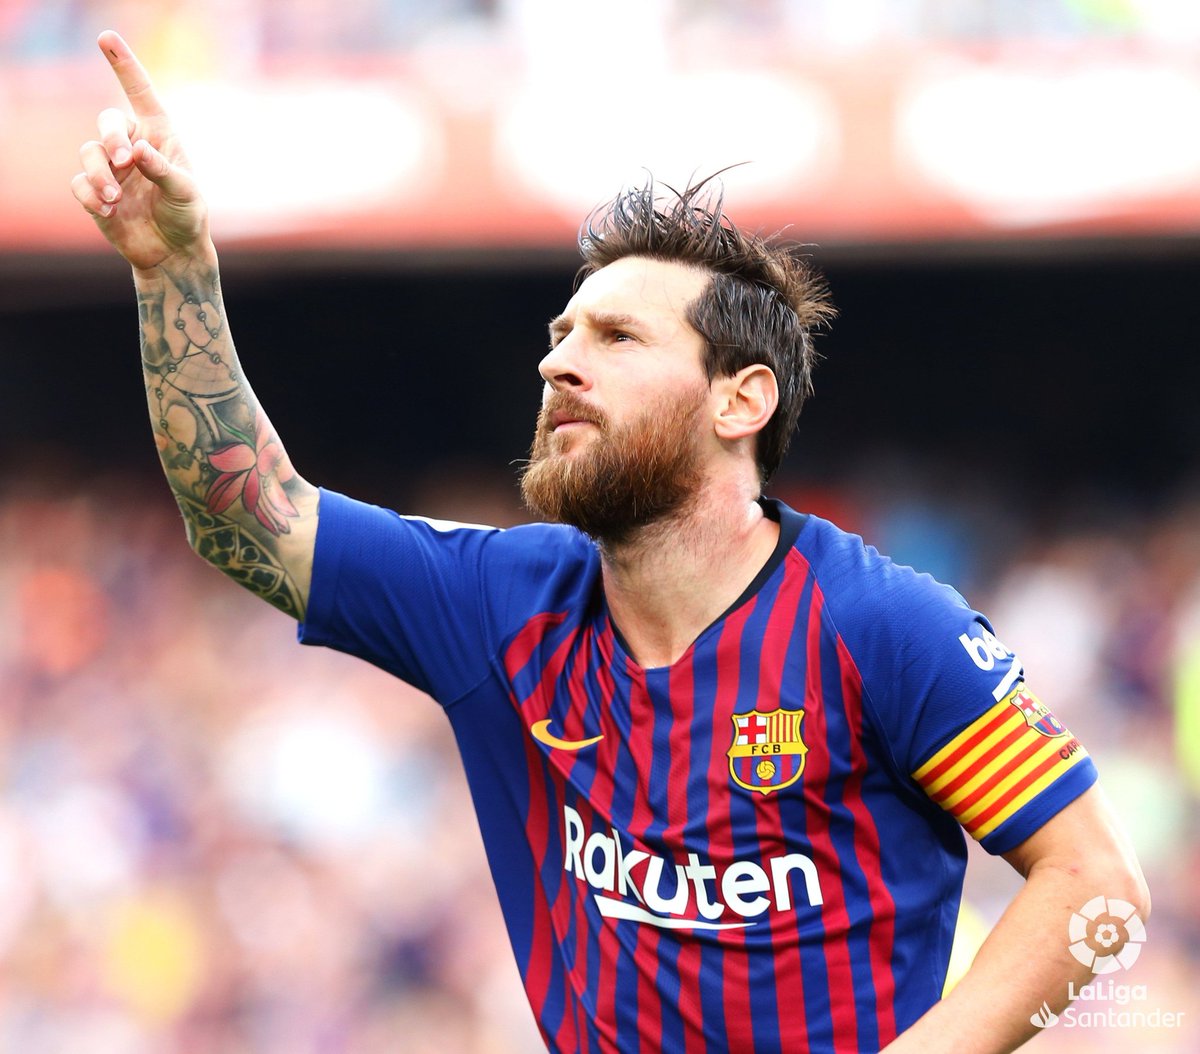 Barca Worldwide On Twitter Full Time Fc Barcelona 8 2 Sd Huesca Messi 2 Goals 2 Assists Alba 1 Goal 2 Assists Rakitic 1 Goal 1 Assist Suarez 2 Goal 1 Assist Dembele 1 Goal Coutinho 1 Assist Https T Co To7gftge2g